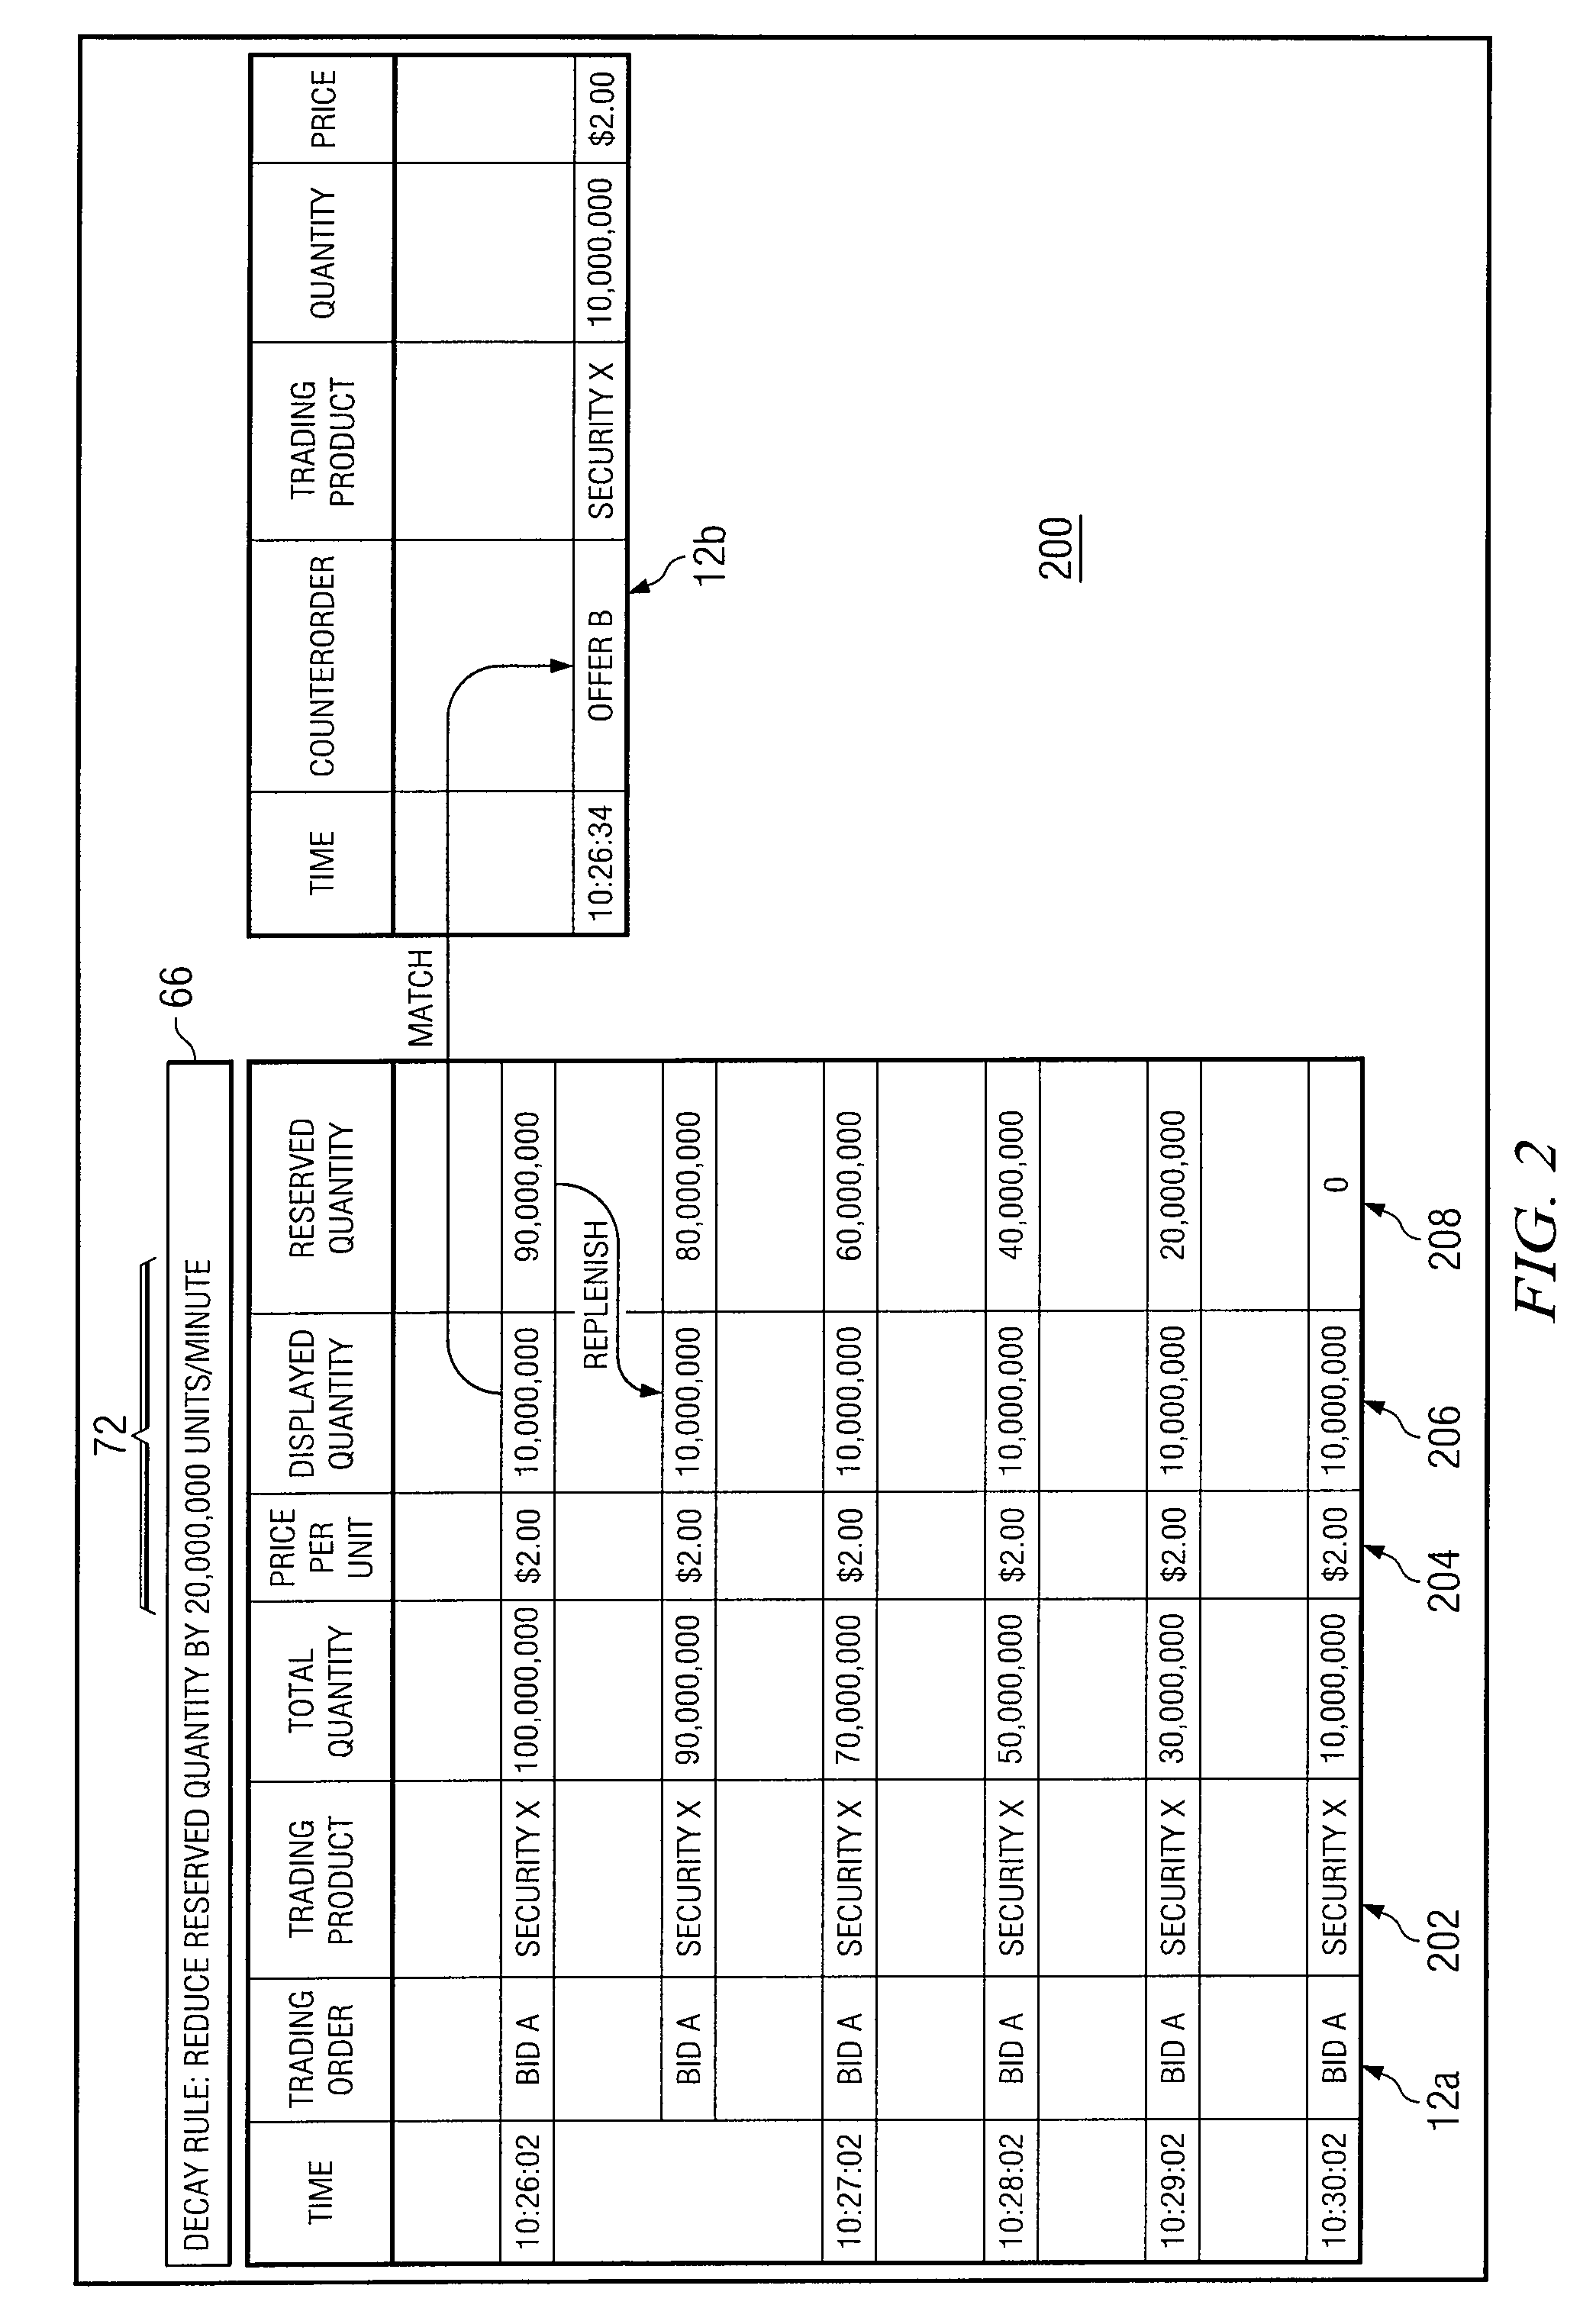 System and method for managing trading orders with decaying reserves